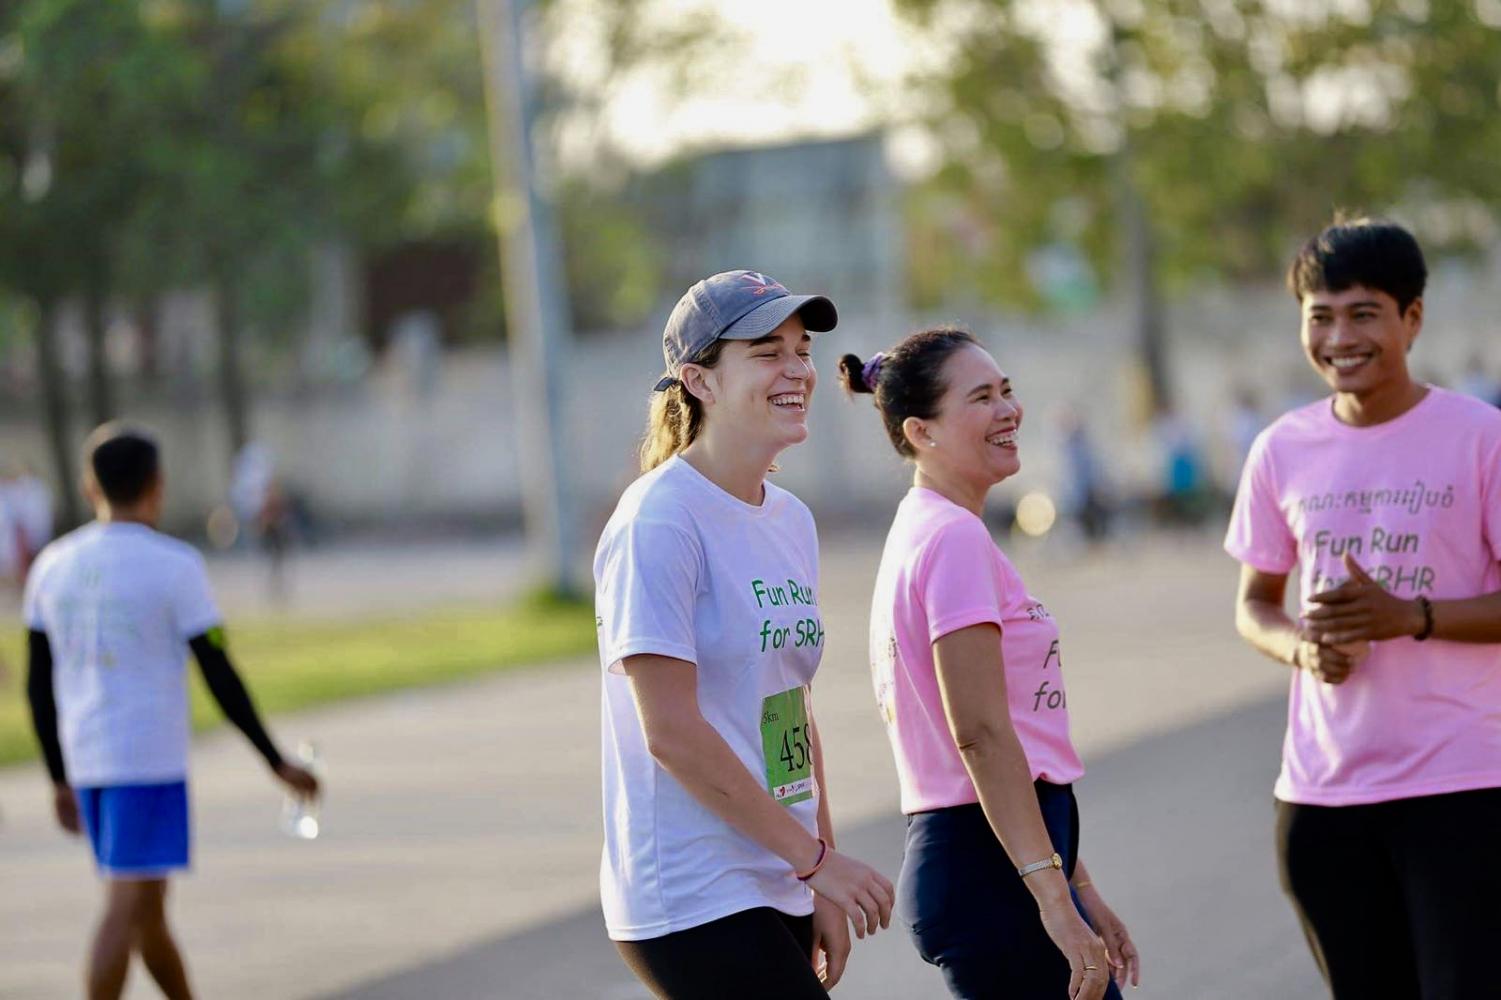 Two women and a man smile during a fundraiser run